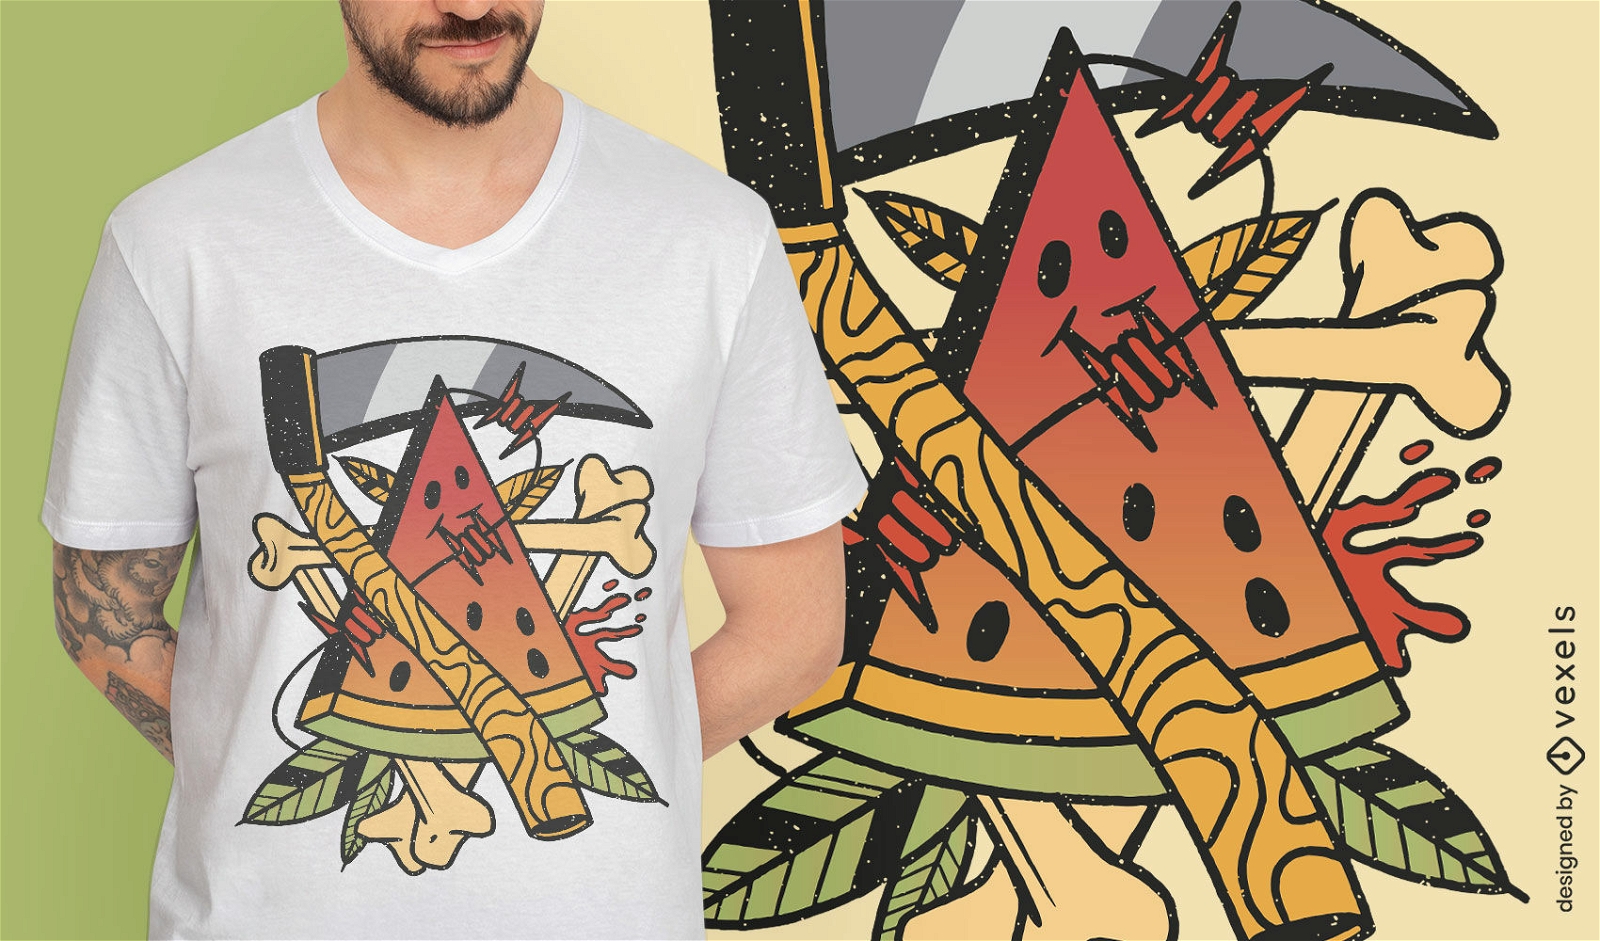 Watermelon and weapon tattoo t-shirt design